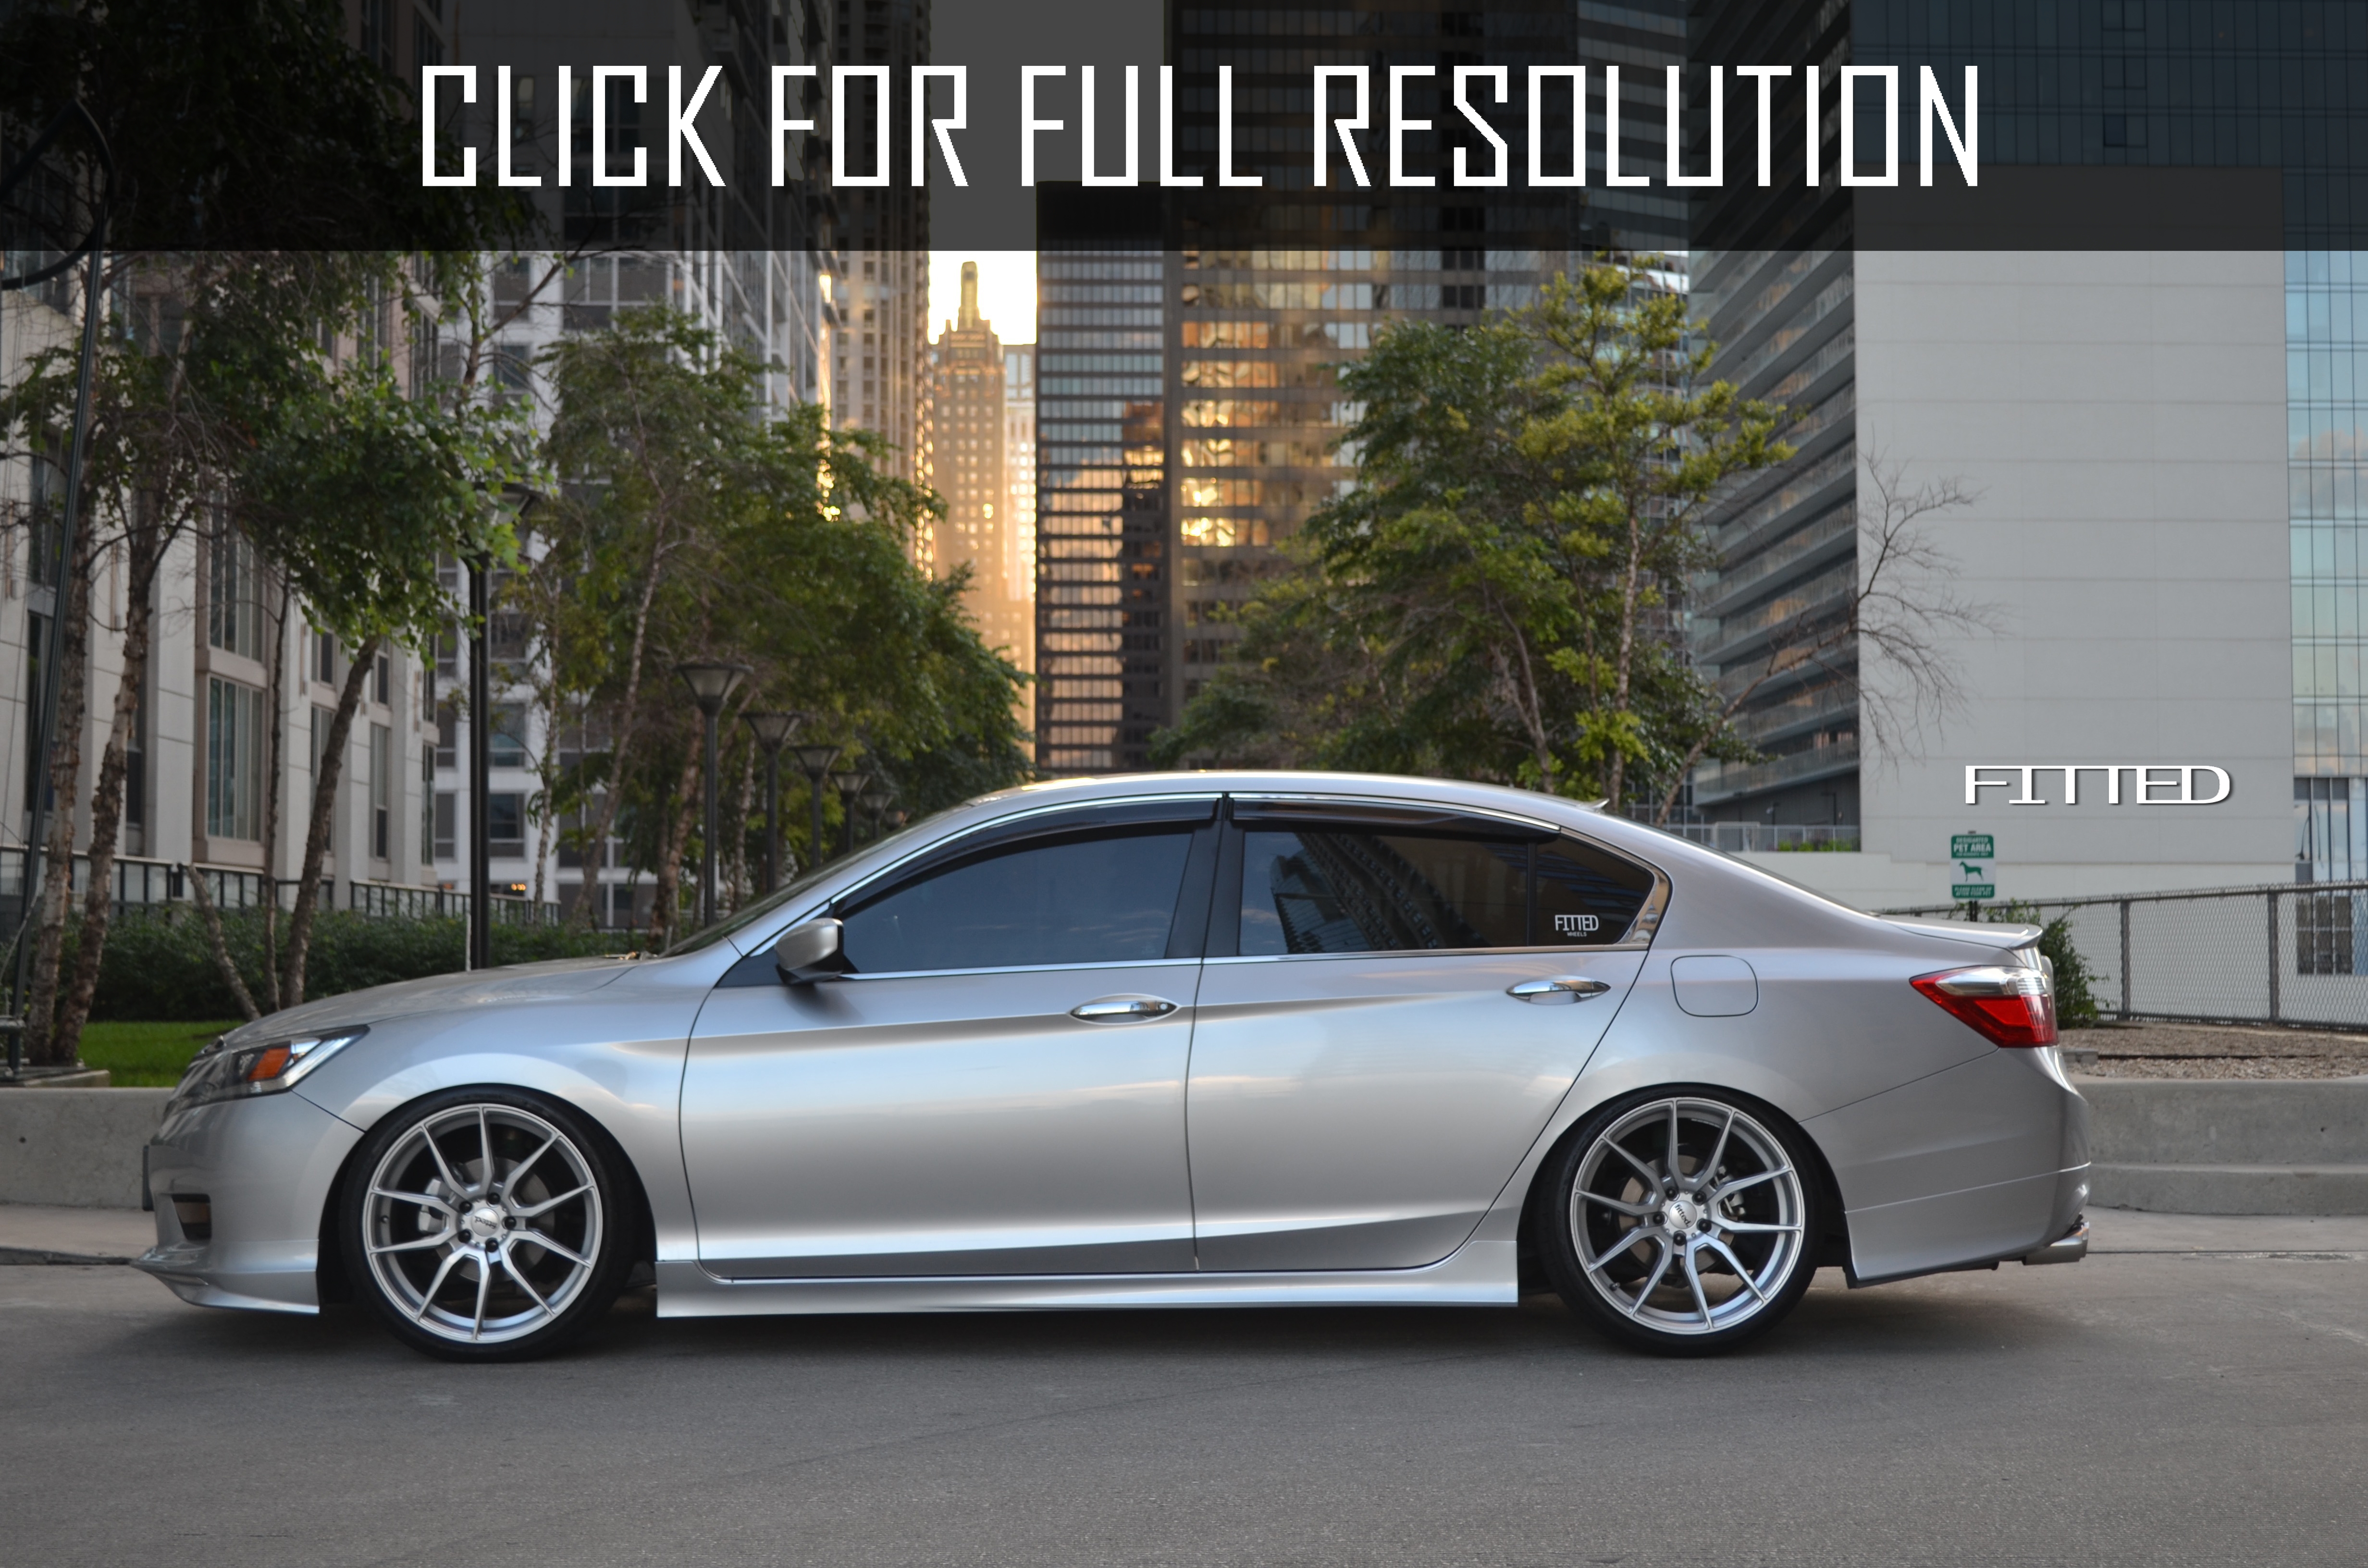 Honda Accord Lowered amazing photo gallery, some information and